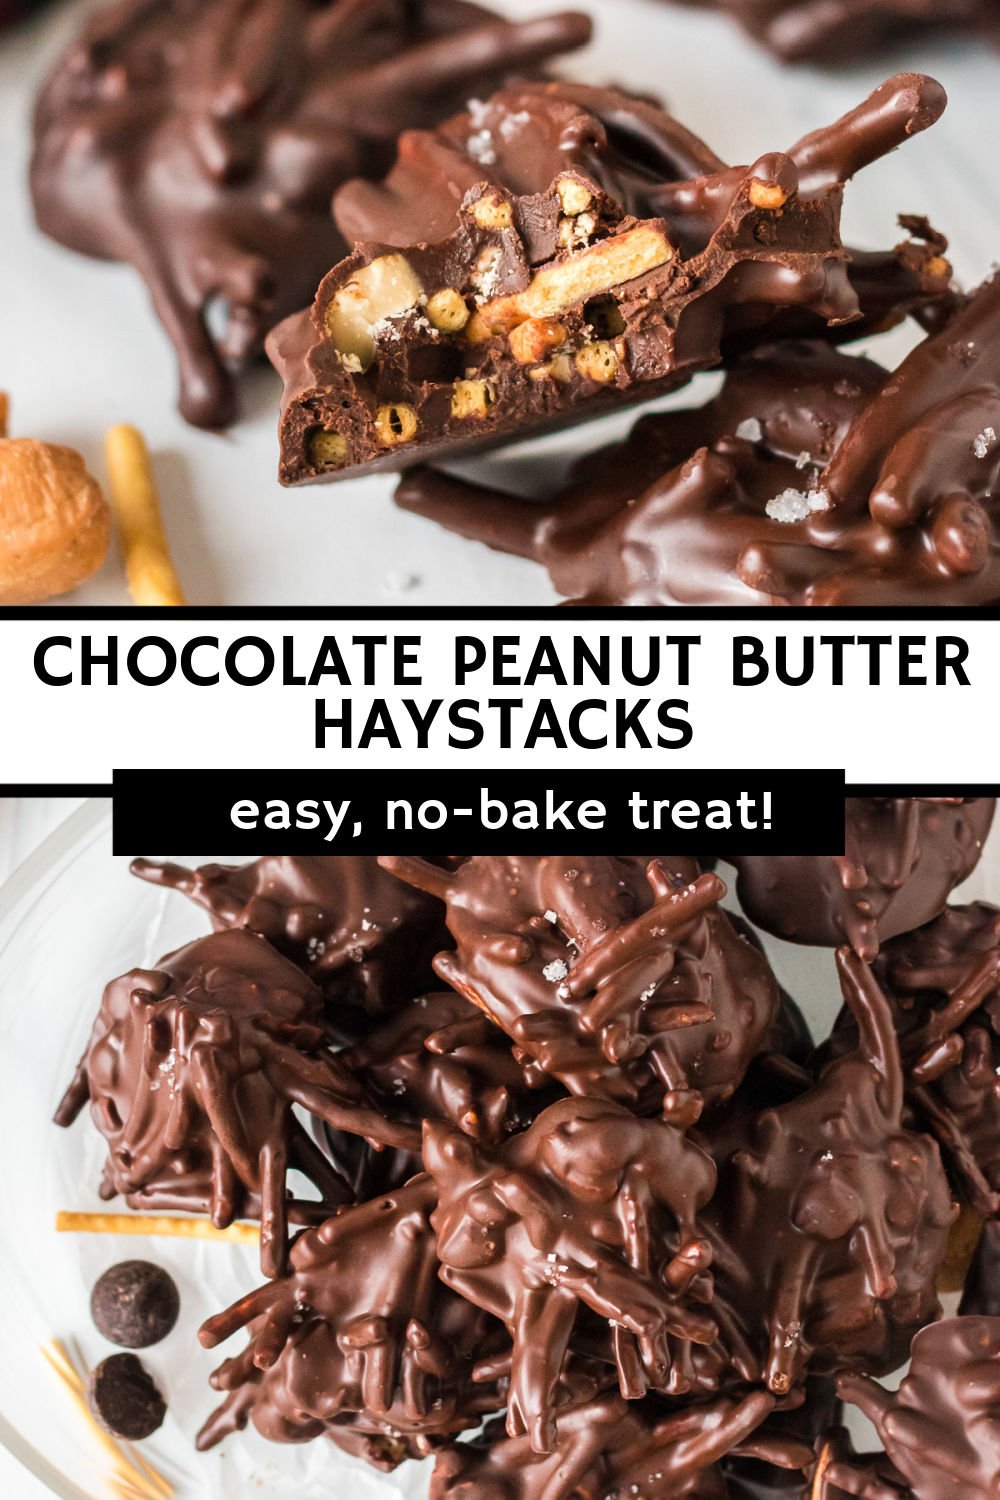 Haystack Cookies are an easy, no-bake treat filled with chocolate, peanut butter, cashews, toffee bits, and chow mein noodles. You can whip up this easy treat in just minutes!  | www.persnicketyplates.com